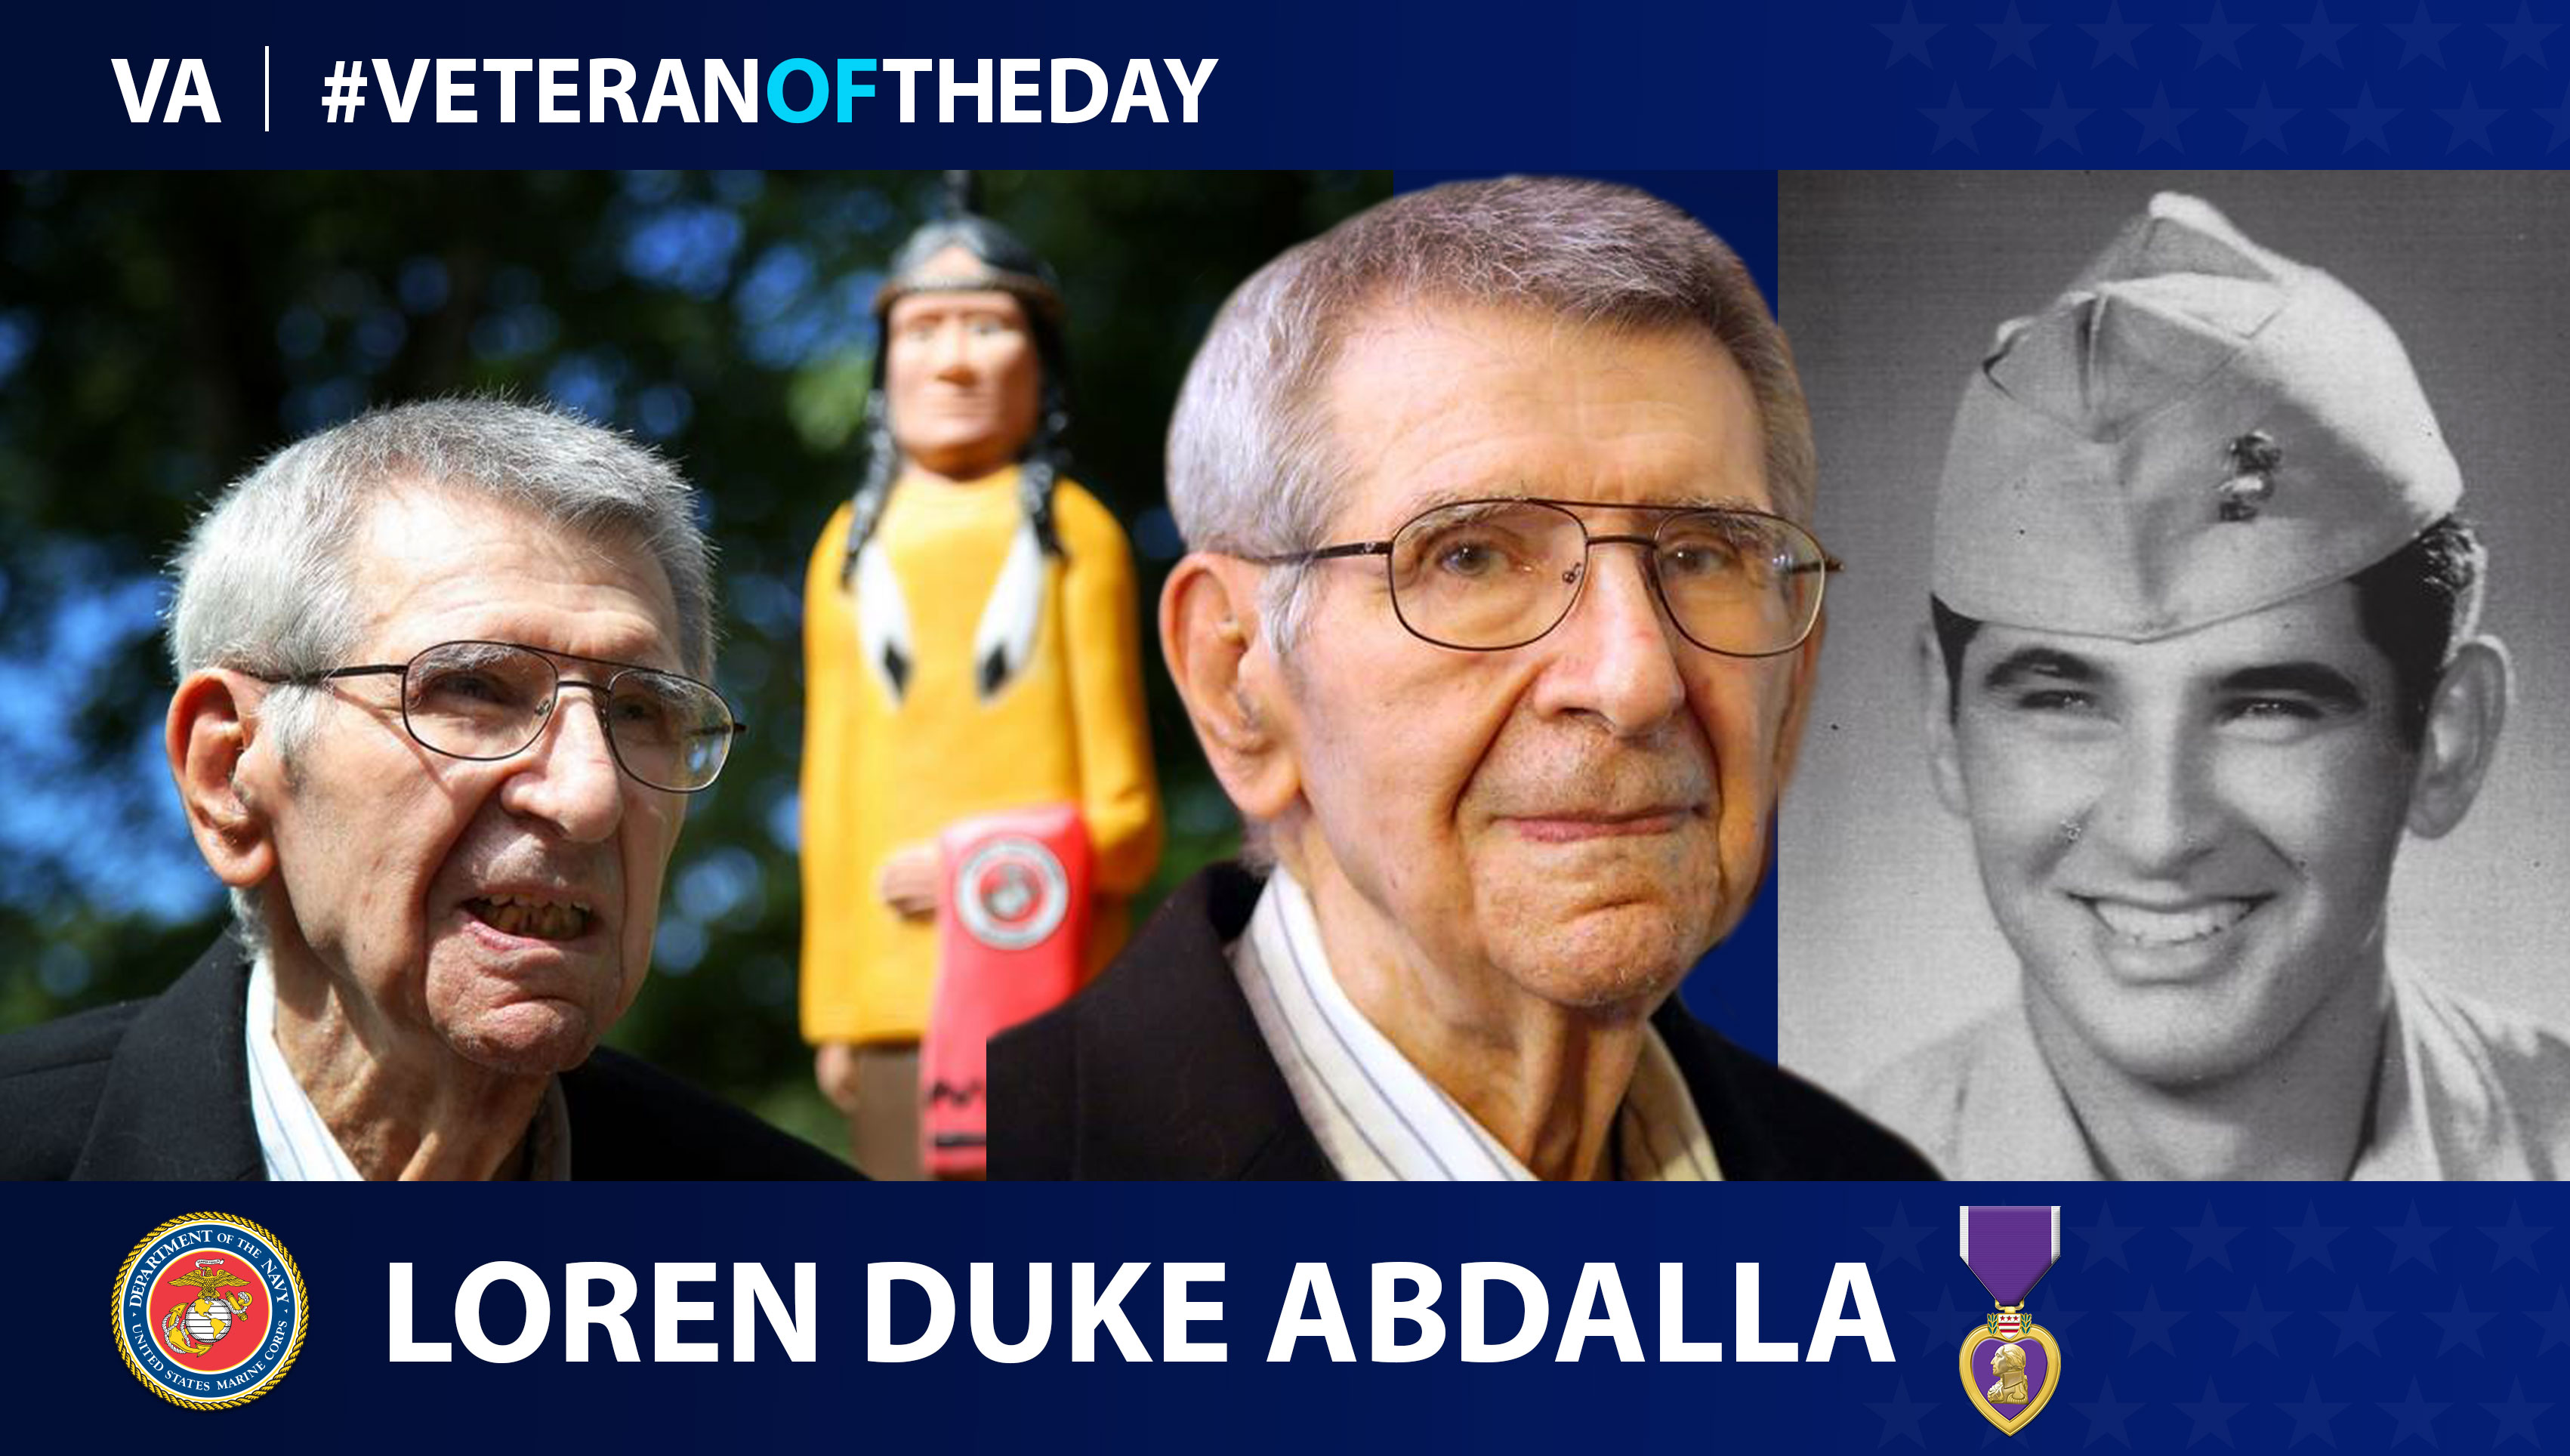 Loren Abdalla is today's Veteran of the Day.